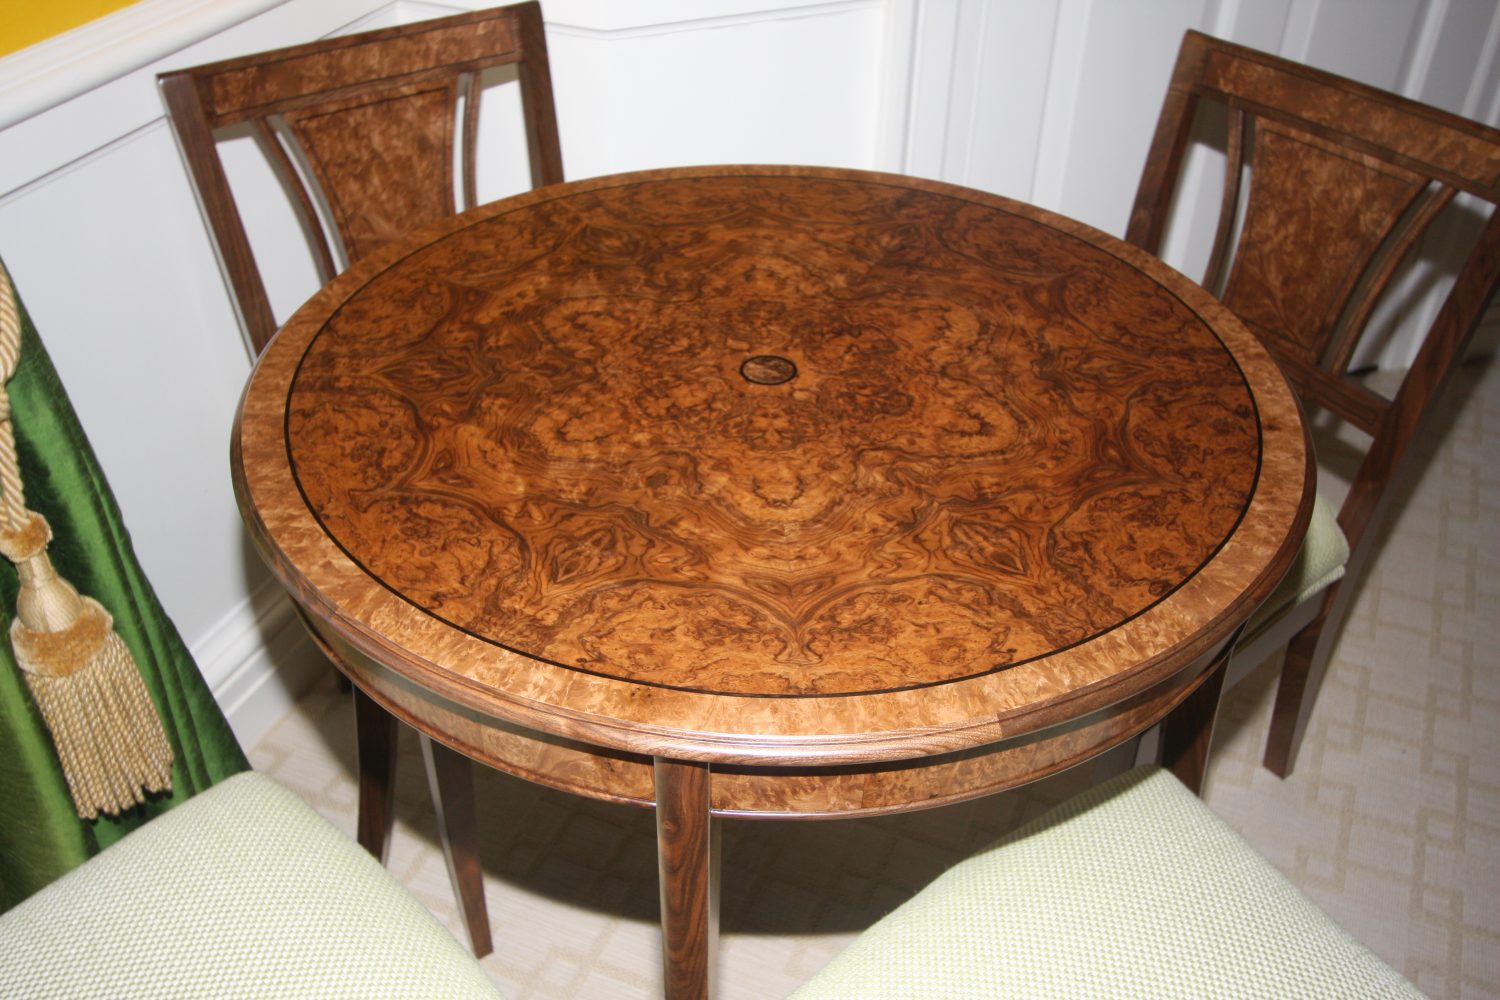 Table with matching chairs